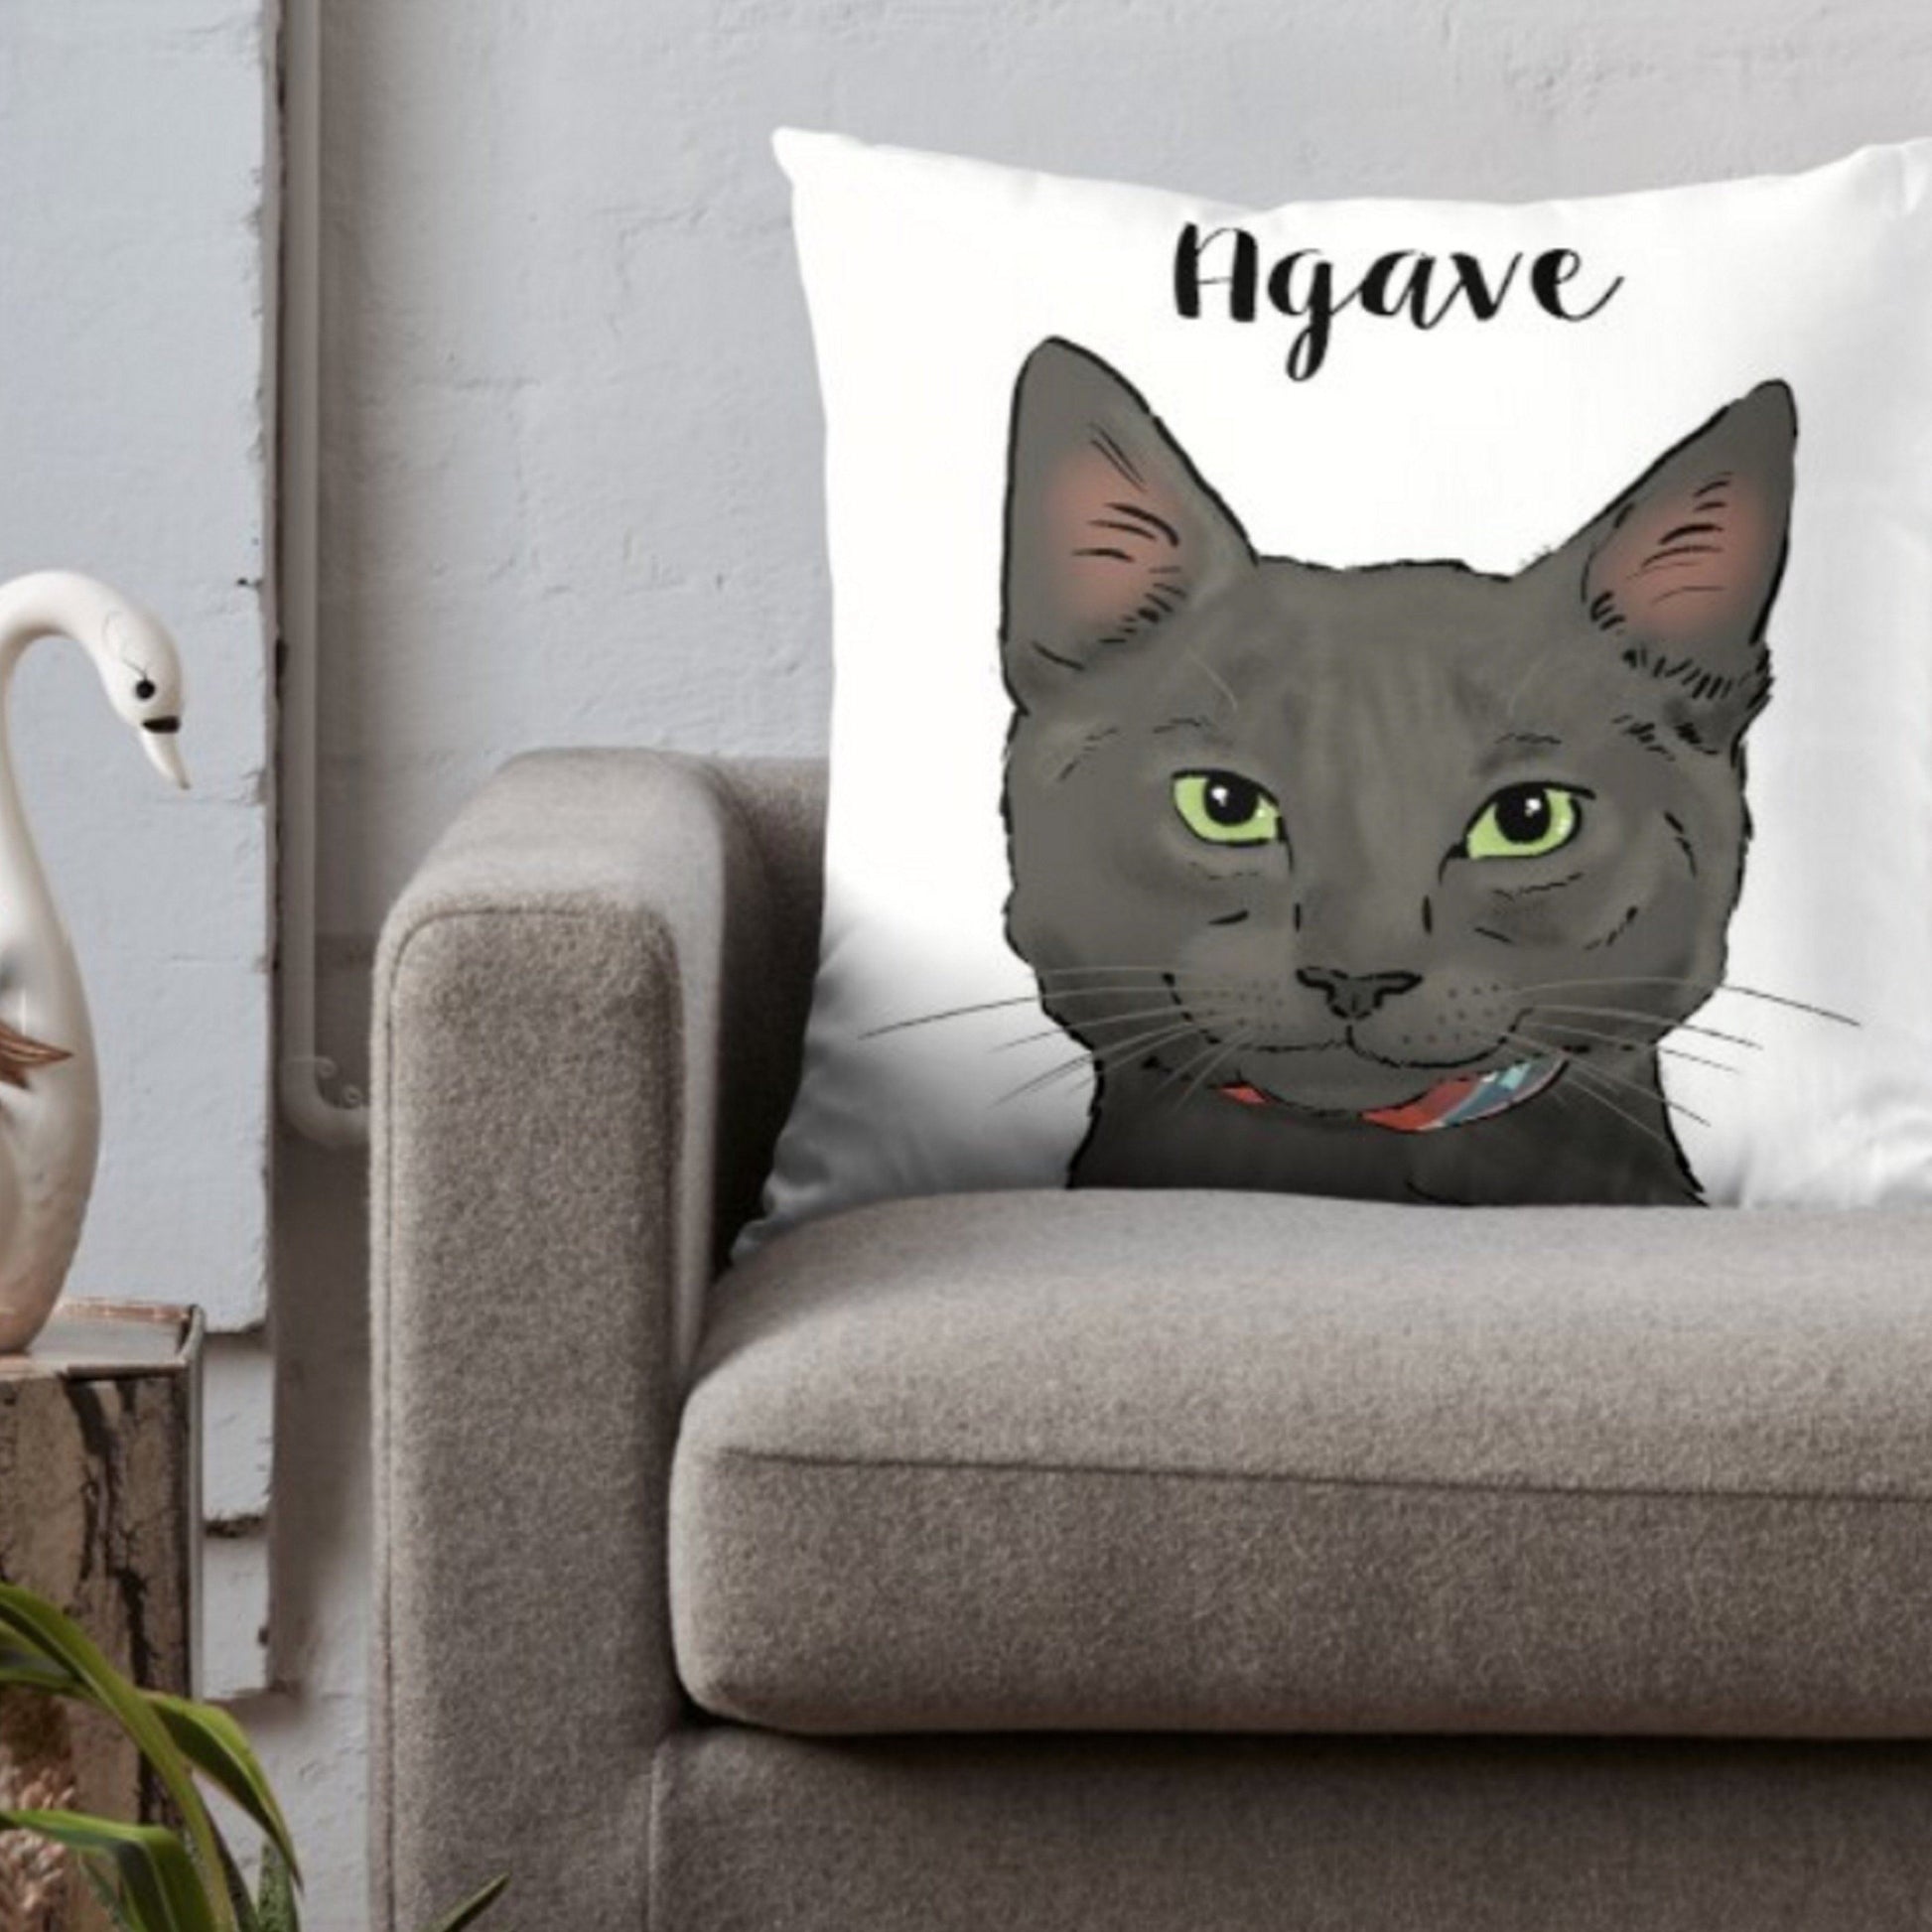 18x18 Pillow - Personalized Pet Pillow, Custom Pillows with